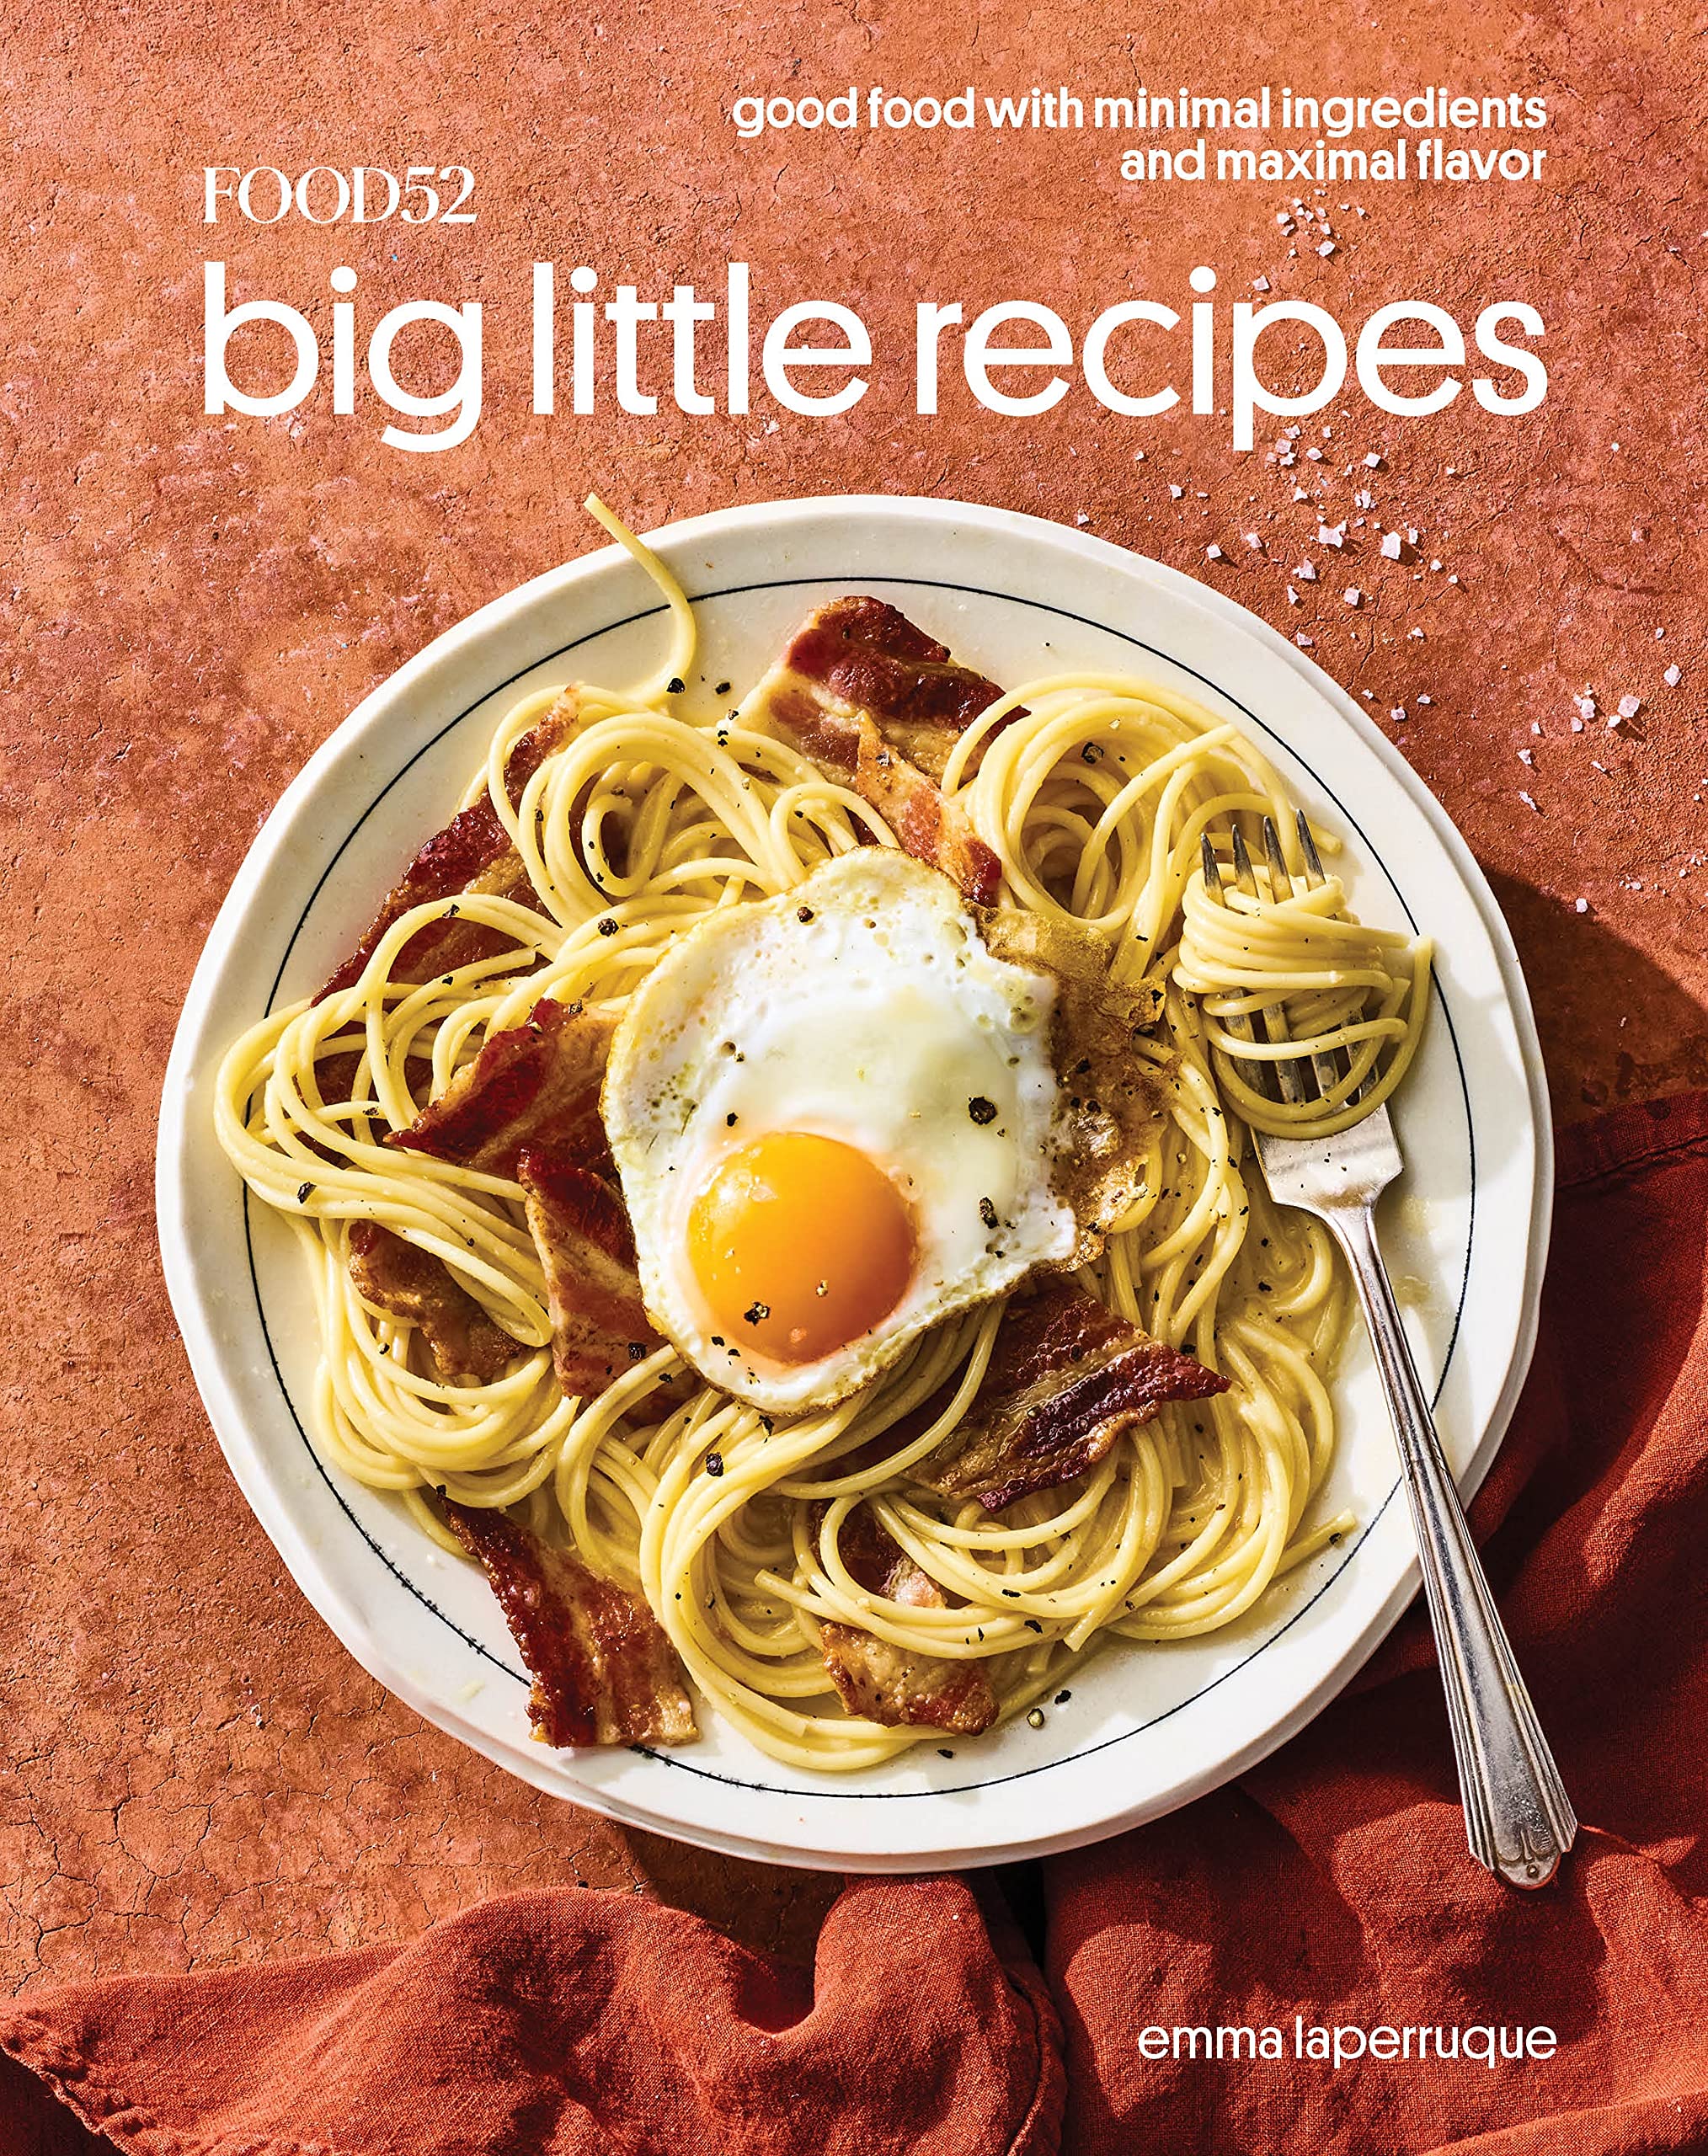 Food52 Big Little Recipes: Good Food with Minimal Ingredients and Maximal Flavor (Emma Laperruque) *Signed*